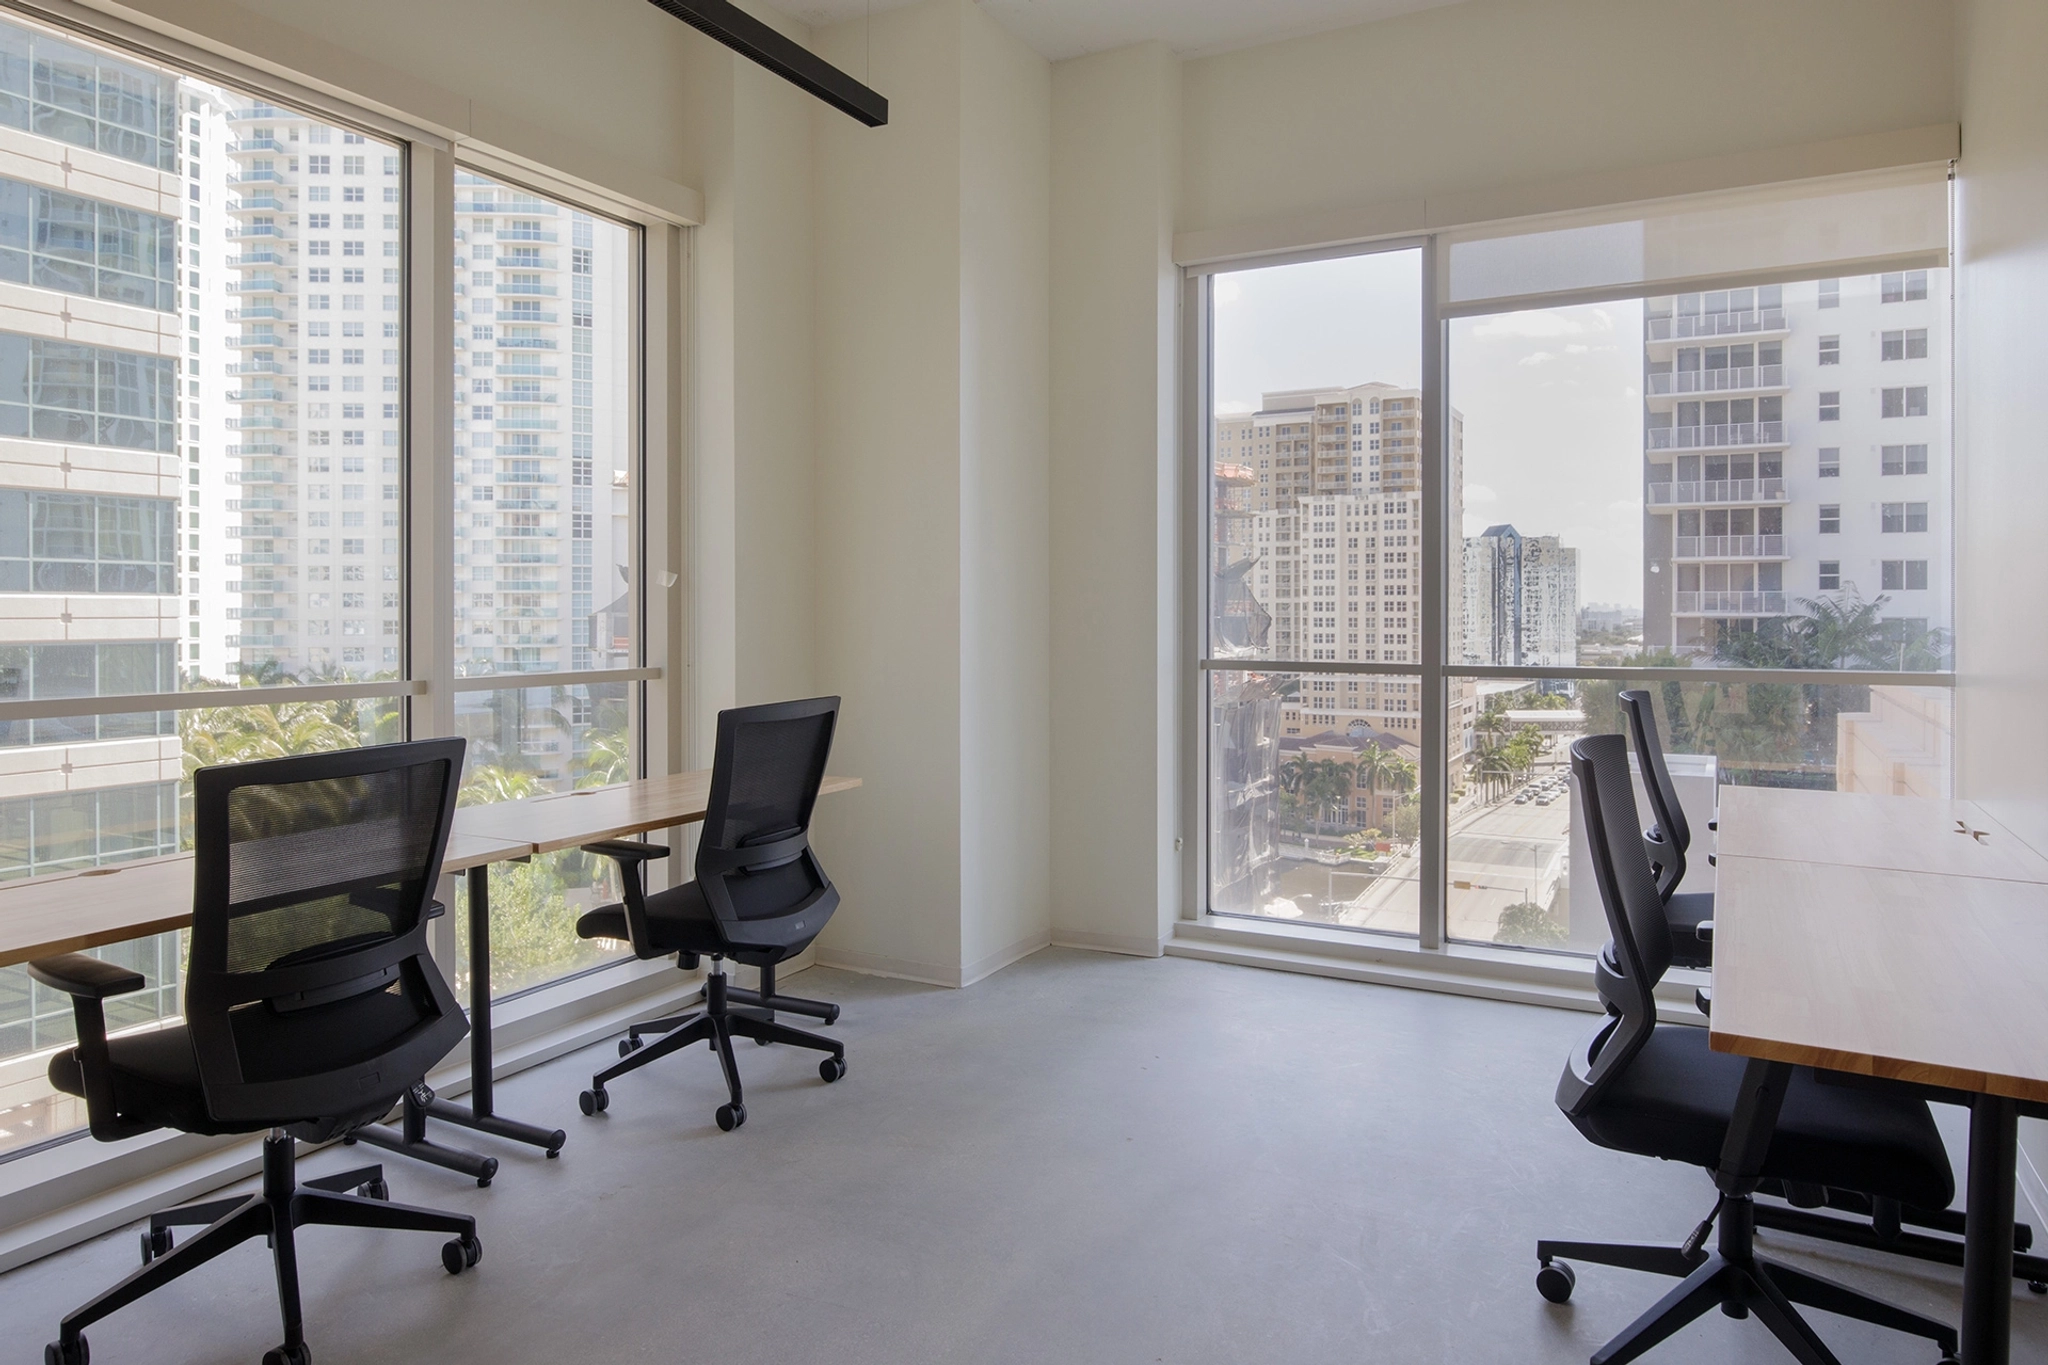 A modern workspace with several empty desks and ergonomic chairs, featuring large windows that offer a view of high-rise buildings and the Fort Lauderdale cityscape.